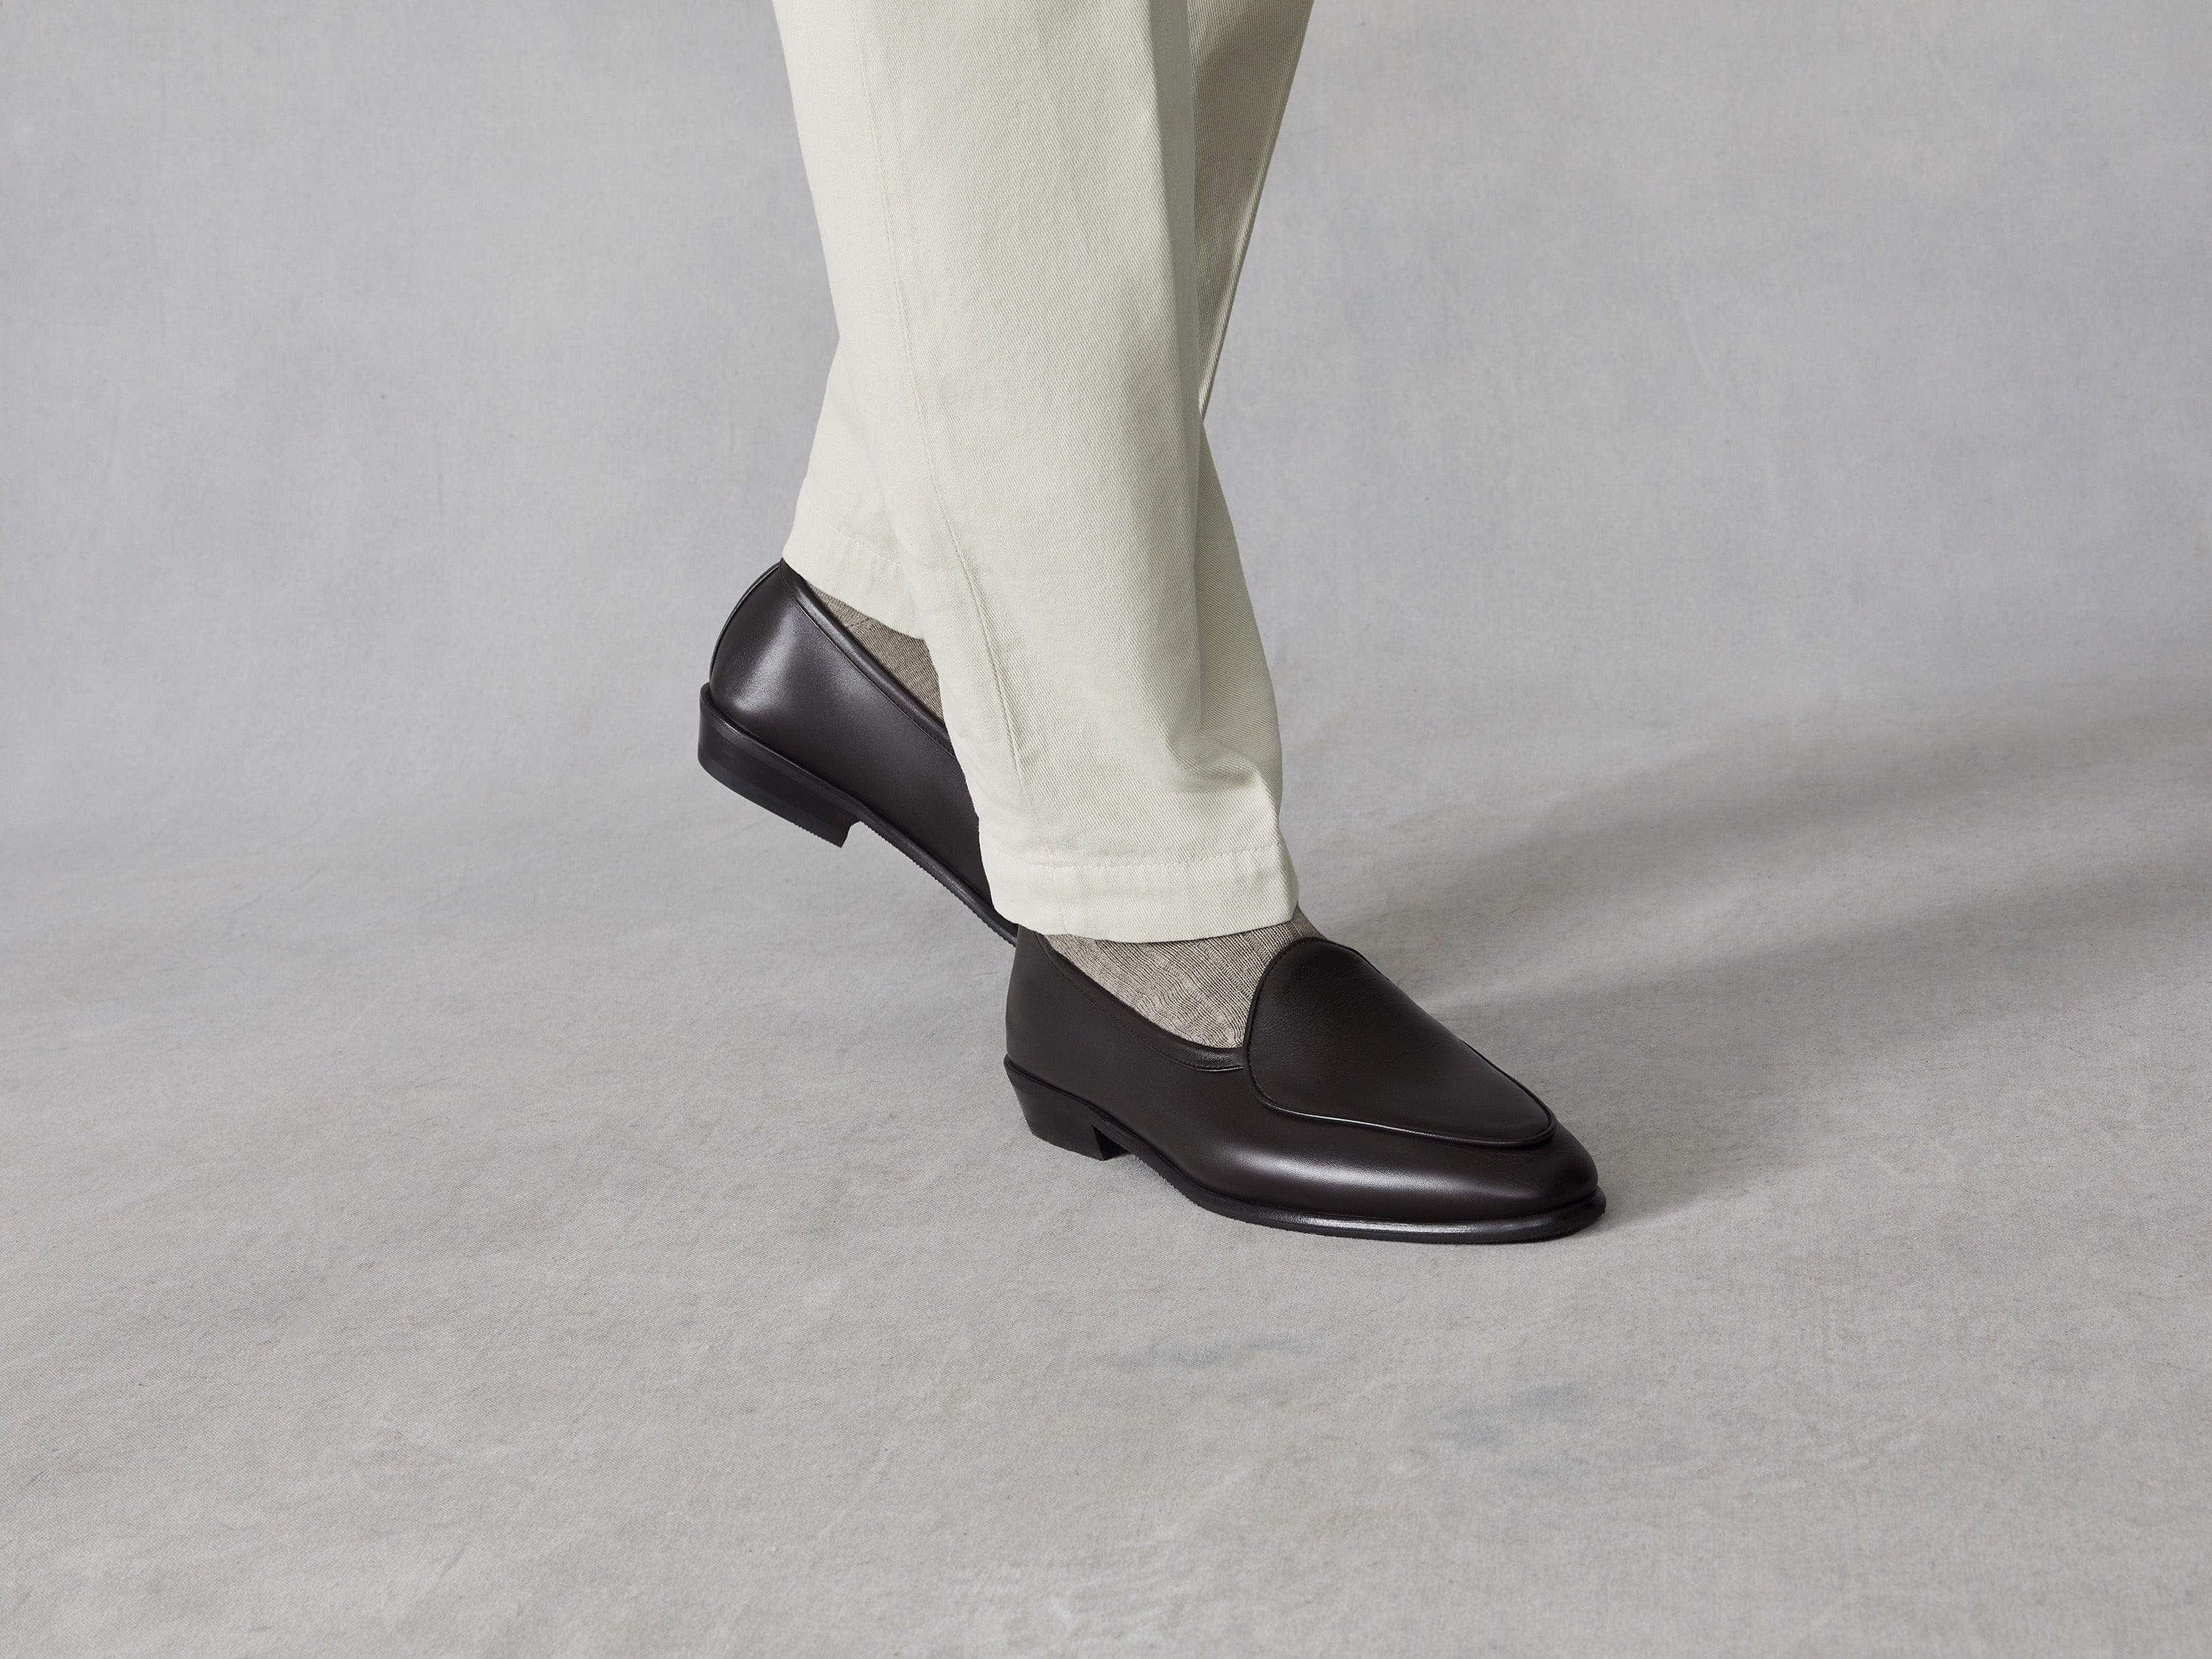 Sagan Classic Loafers in Dark Brown Drape Calf with Rubber Sole